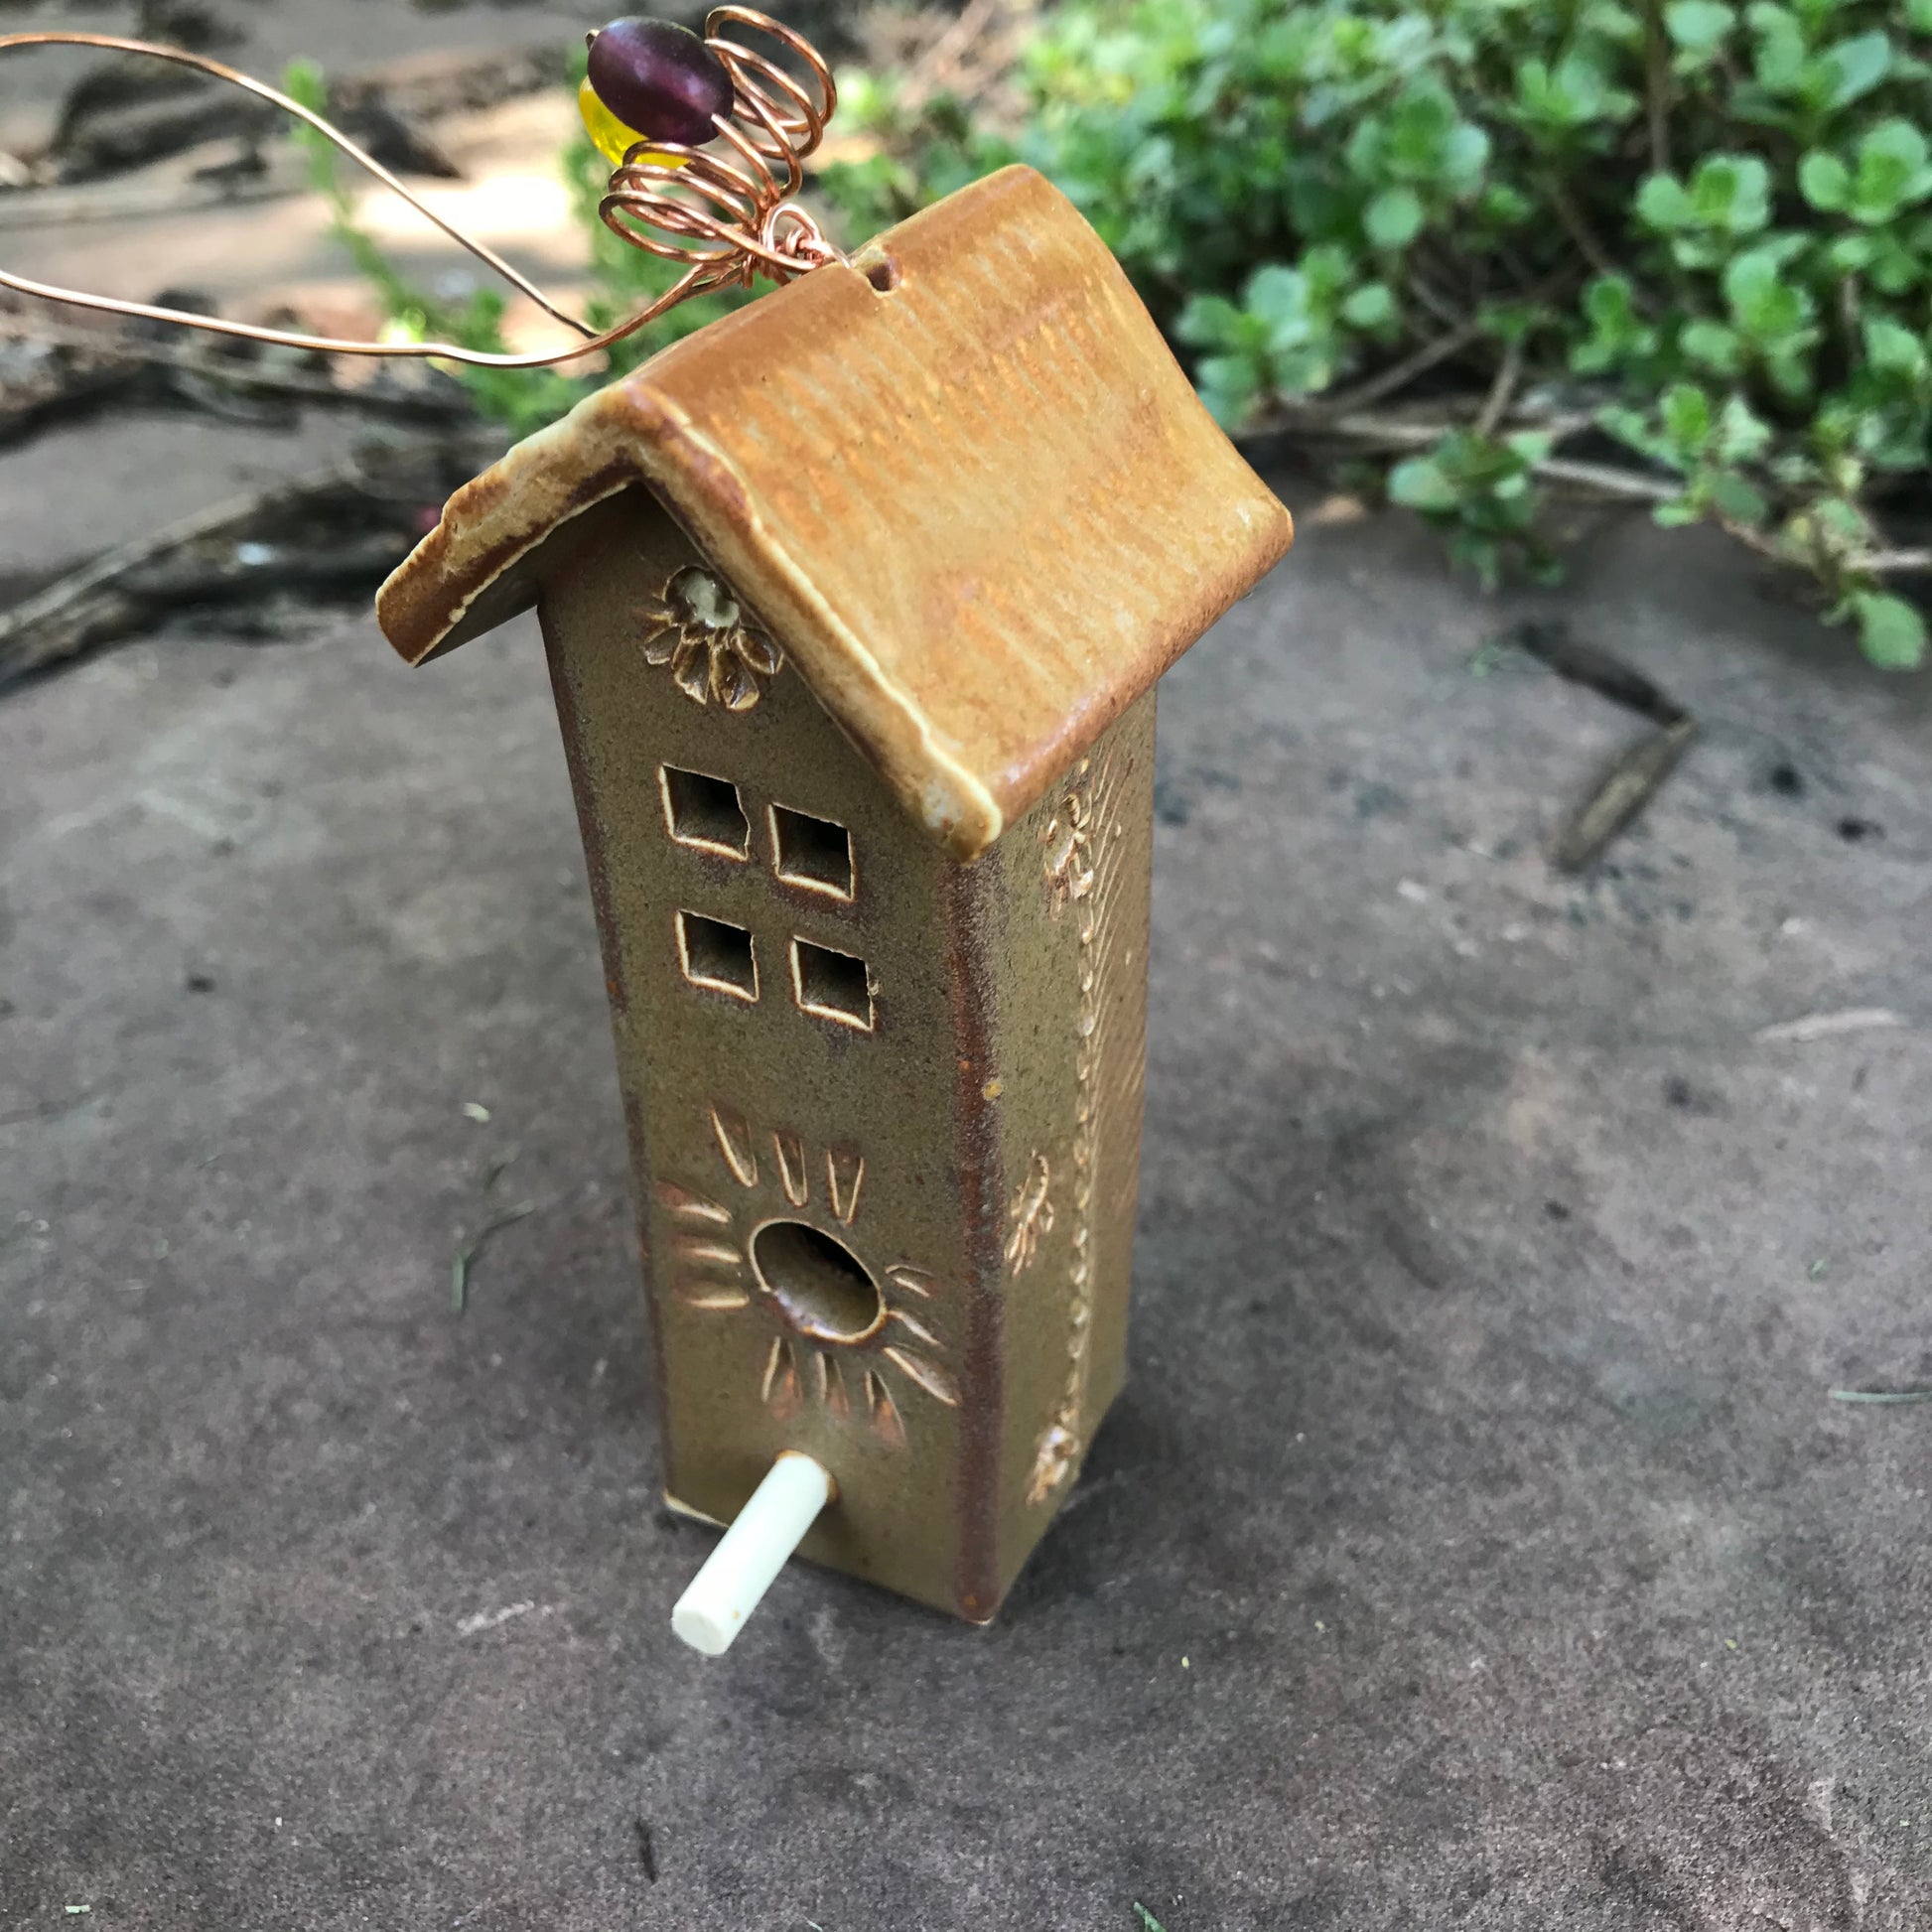 Mini Hanging Birdhouse by Michael Macone - © Blue Pomegranate Gallery